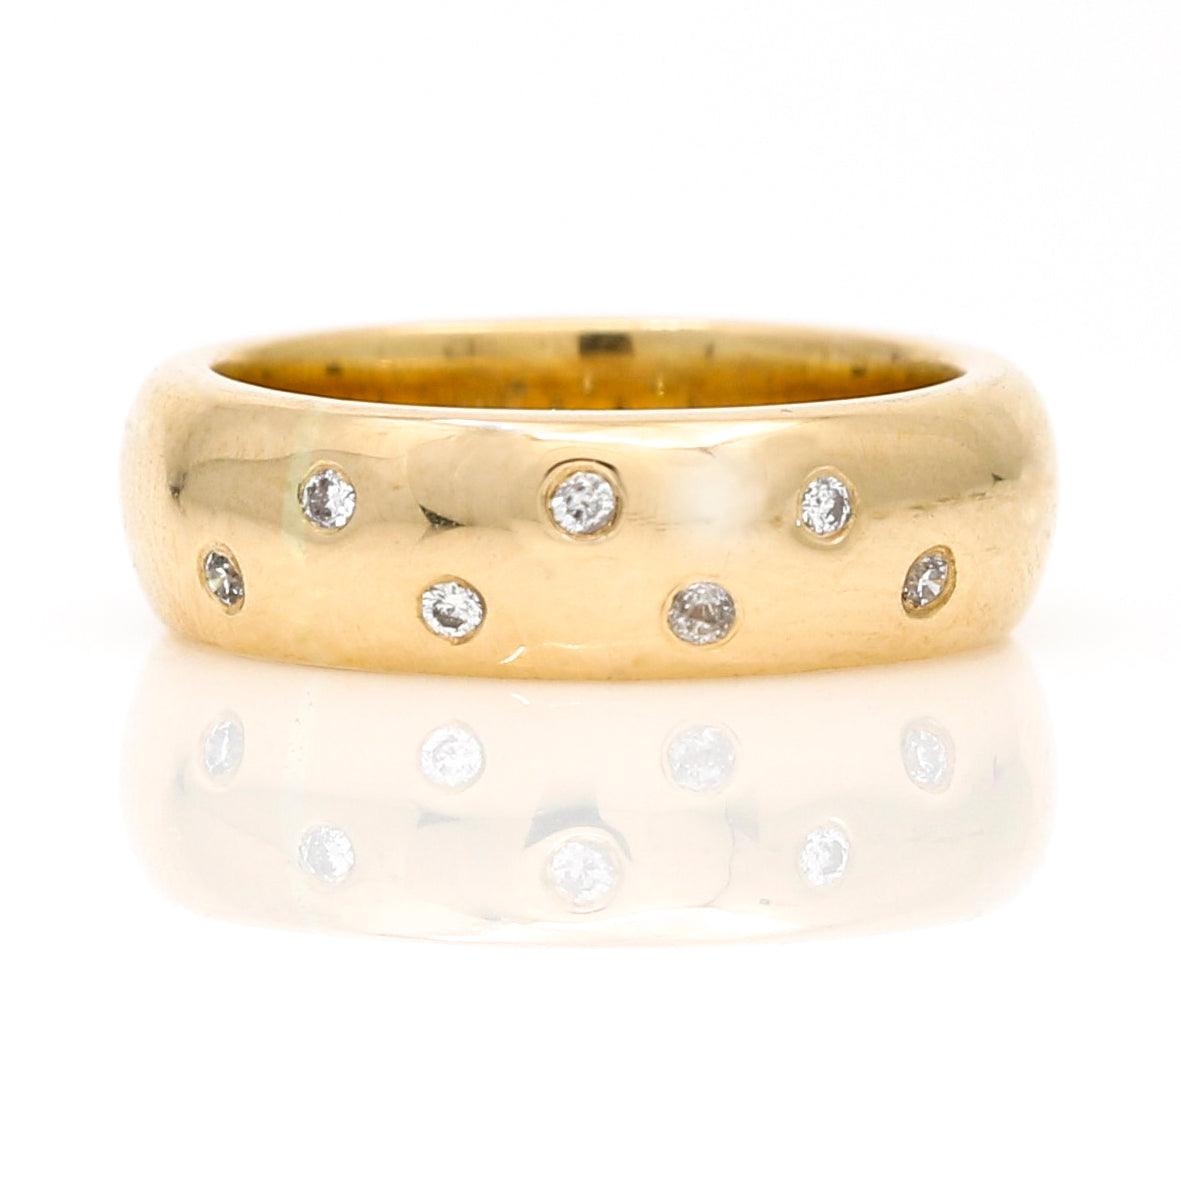 Women's Diamond Band Ring in 18k Yellow Gold for Pinky or Petite - 31 Jewels Inc.